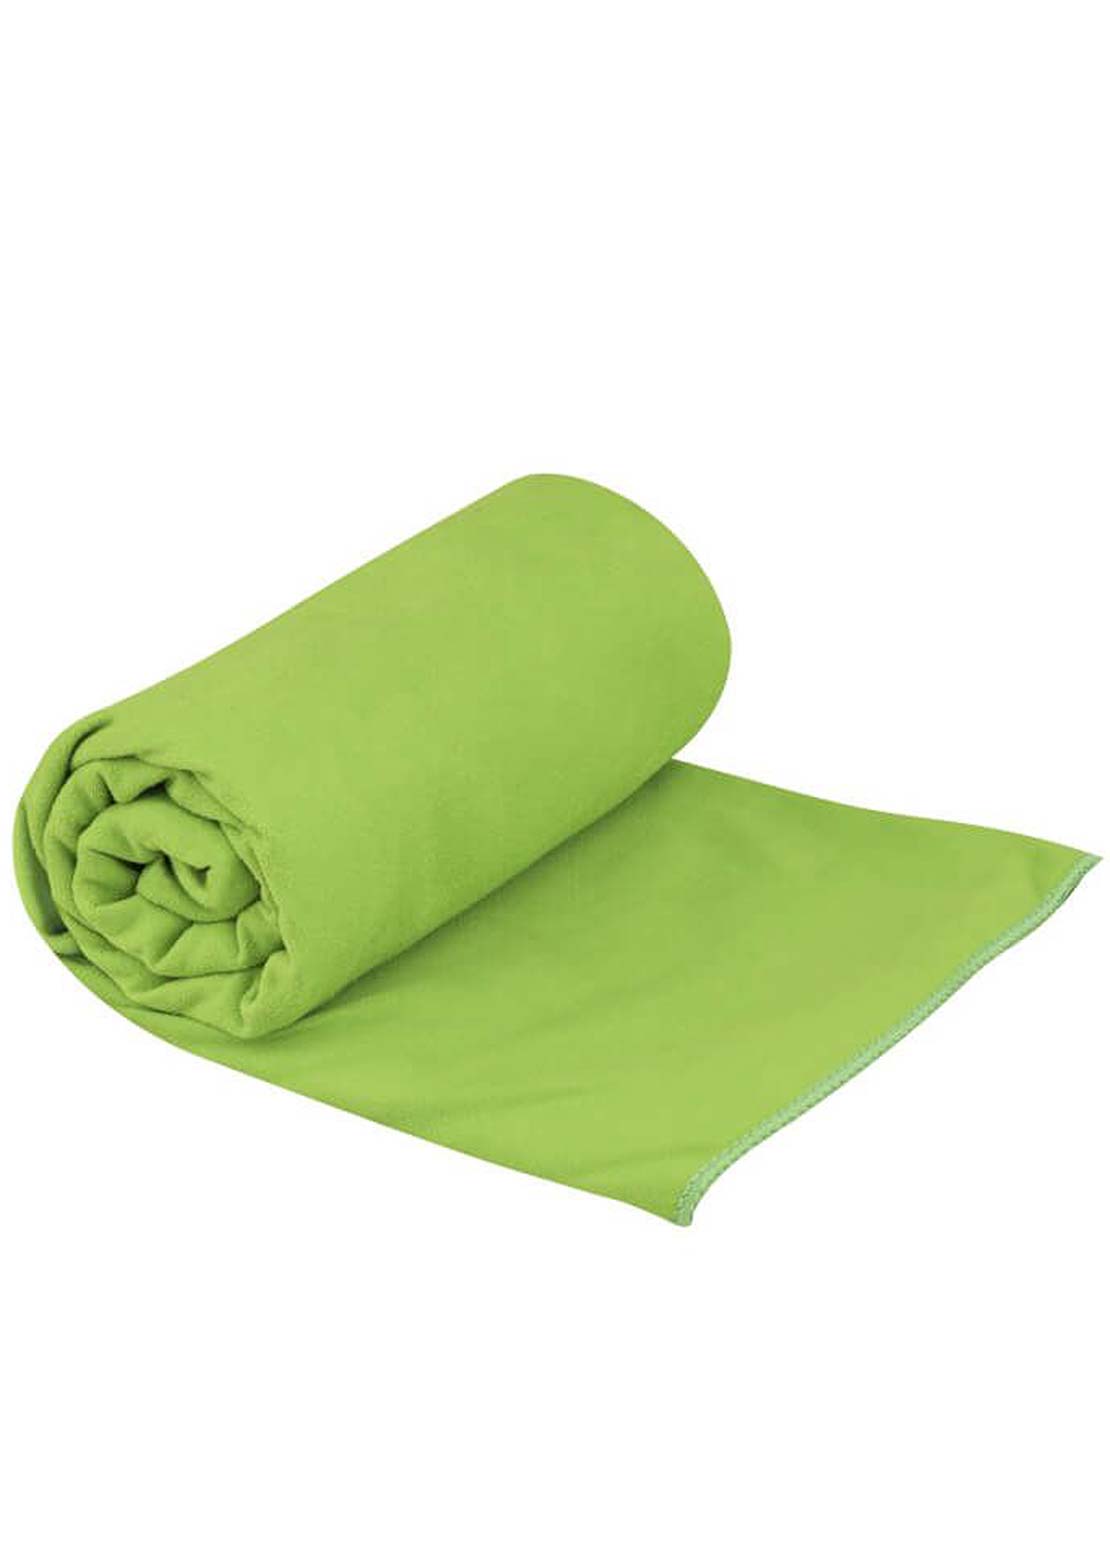 Sea To Summit Drylite Towel - 24 x 48 Lime Green